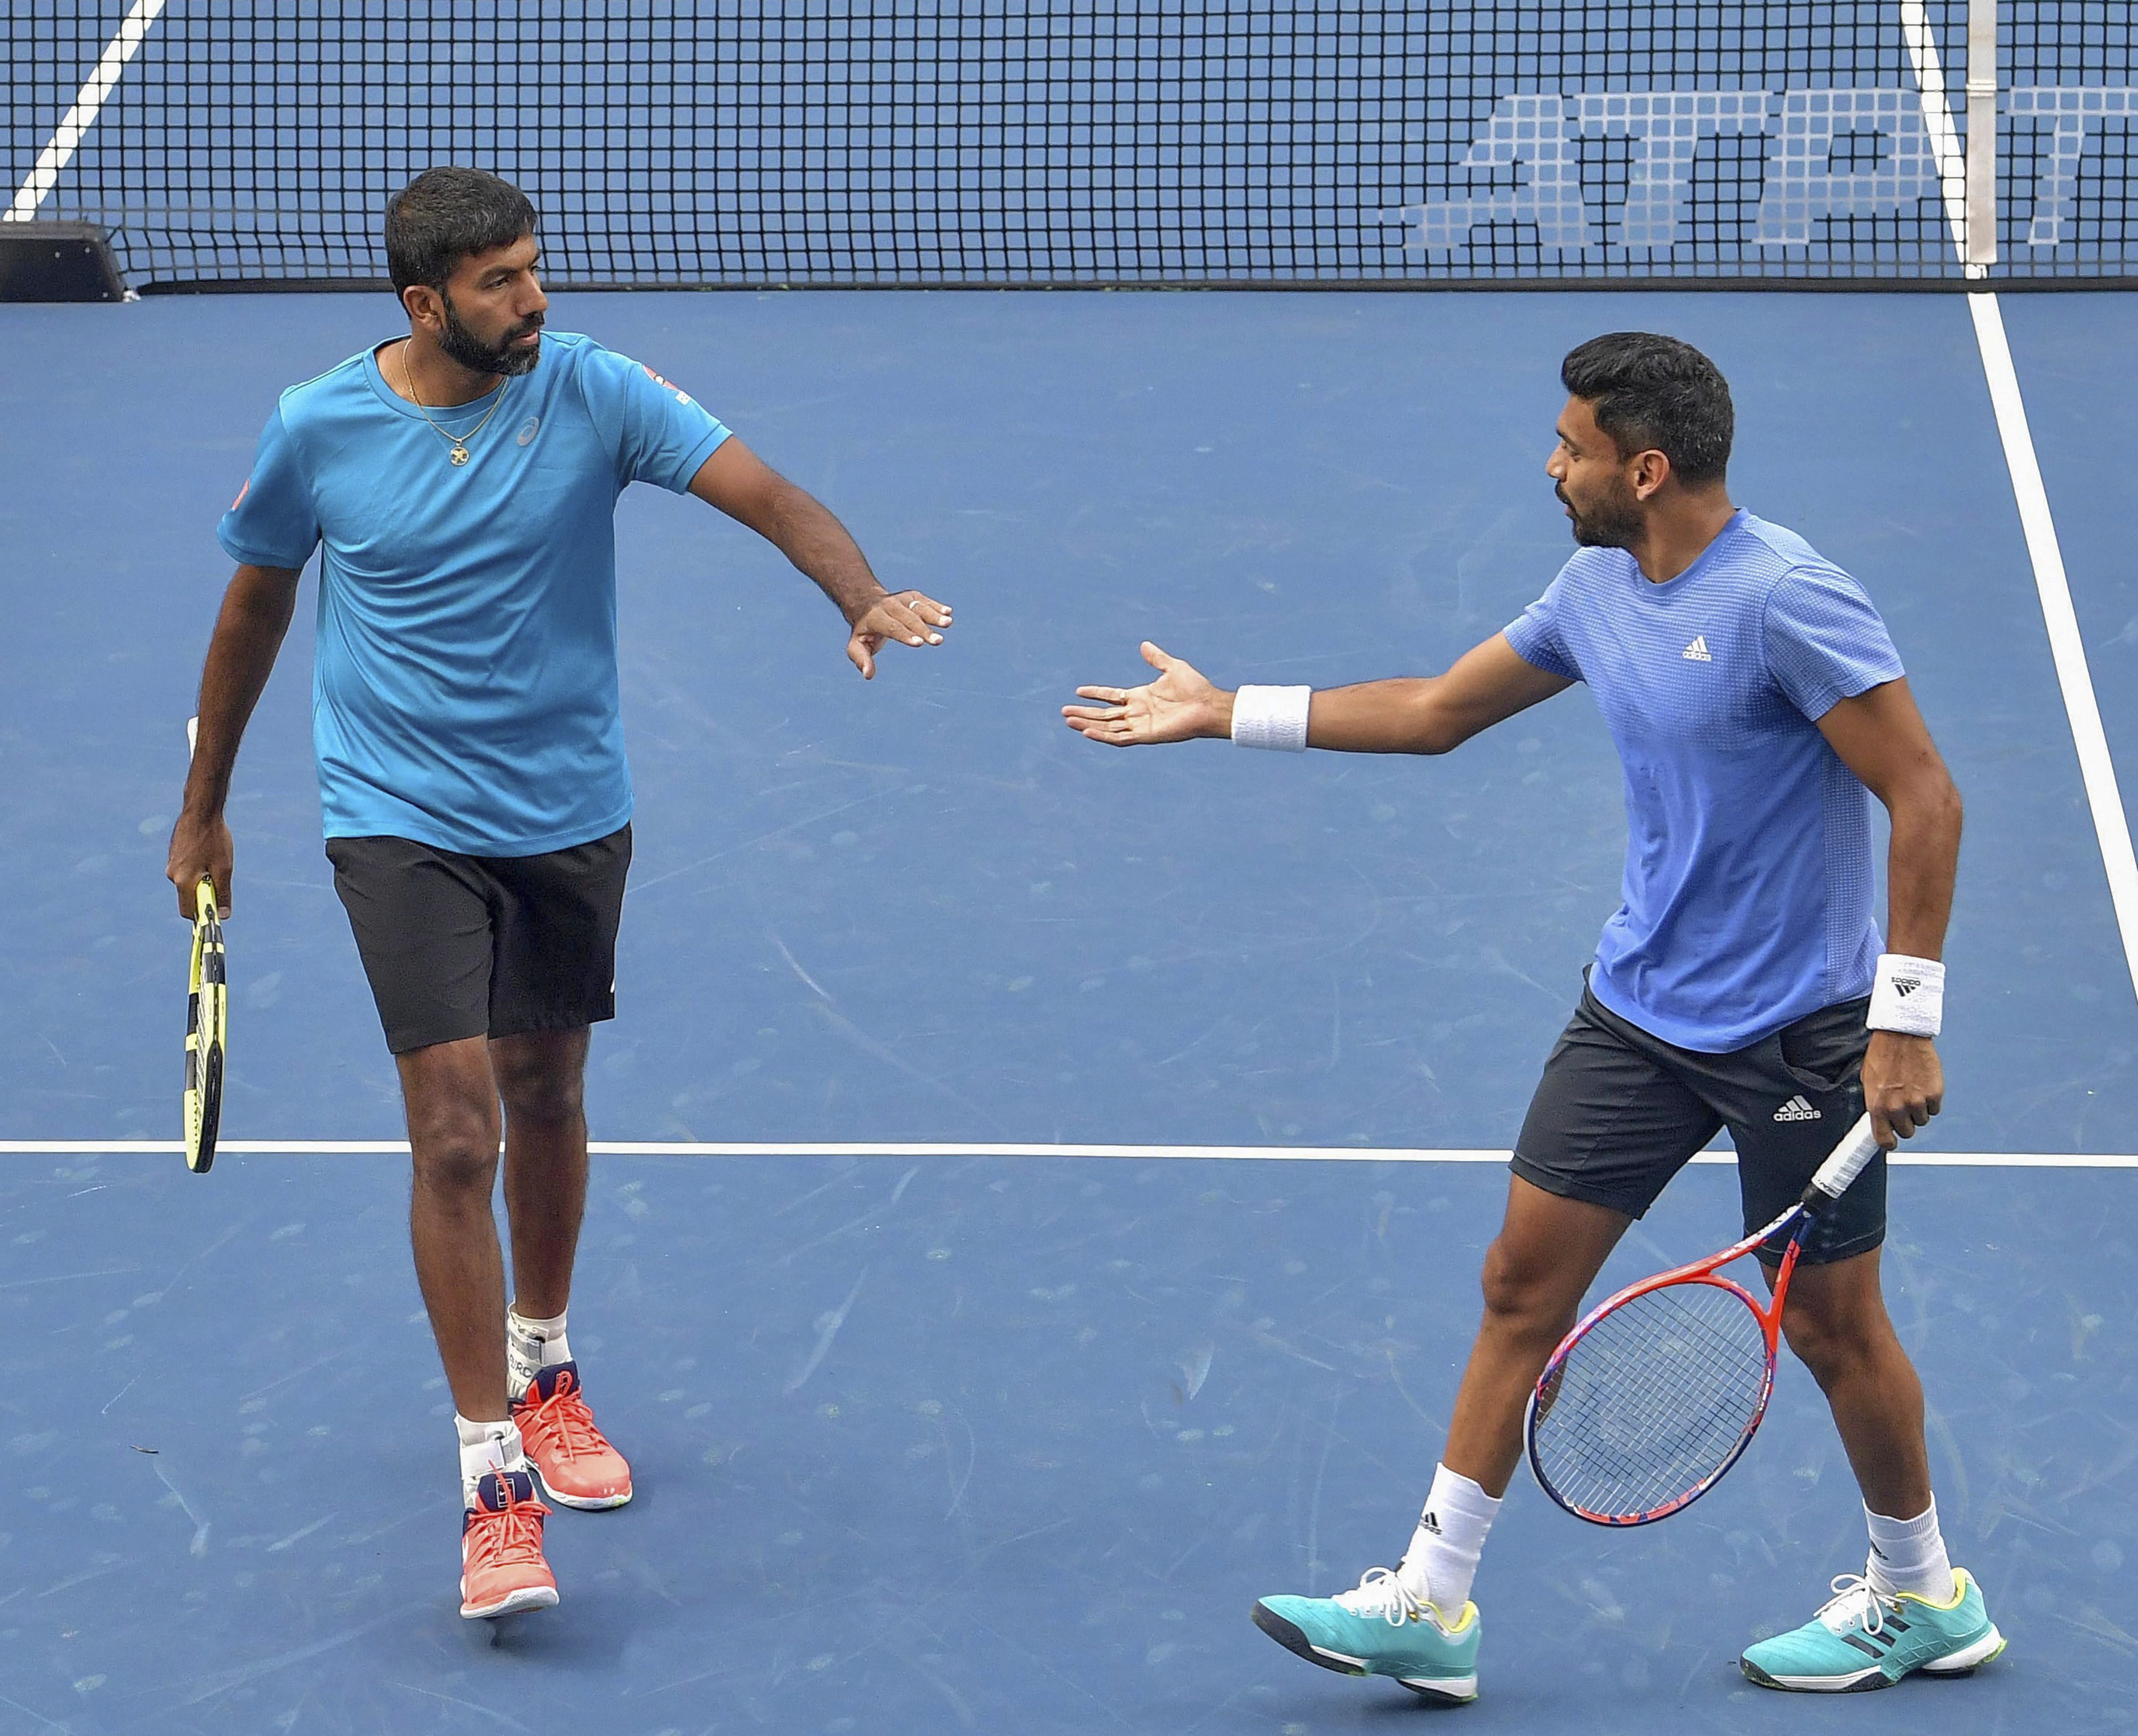 Tennis players Rohan Bopanna and Divij Sharan during a match against Simone Bolelli and Ivan Dodig at Tata Open Maharashtra 2019 of the ATP 250 tournament, in Pune - PTI